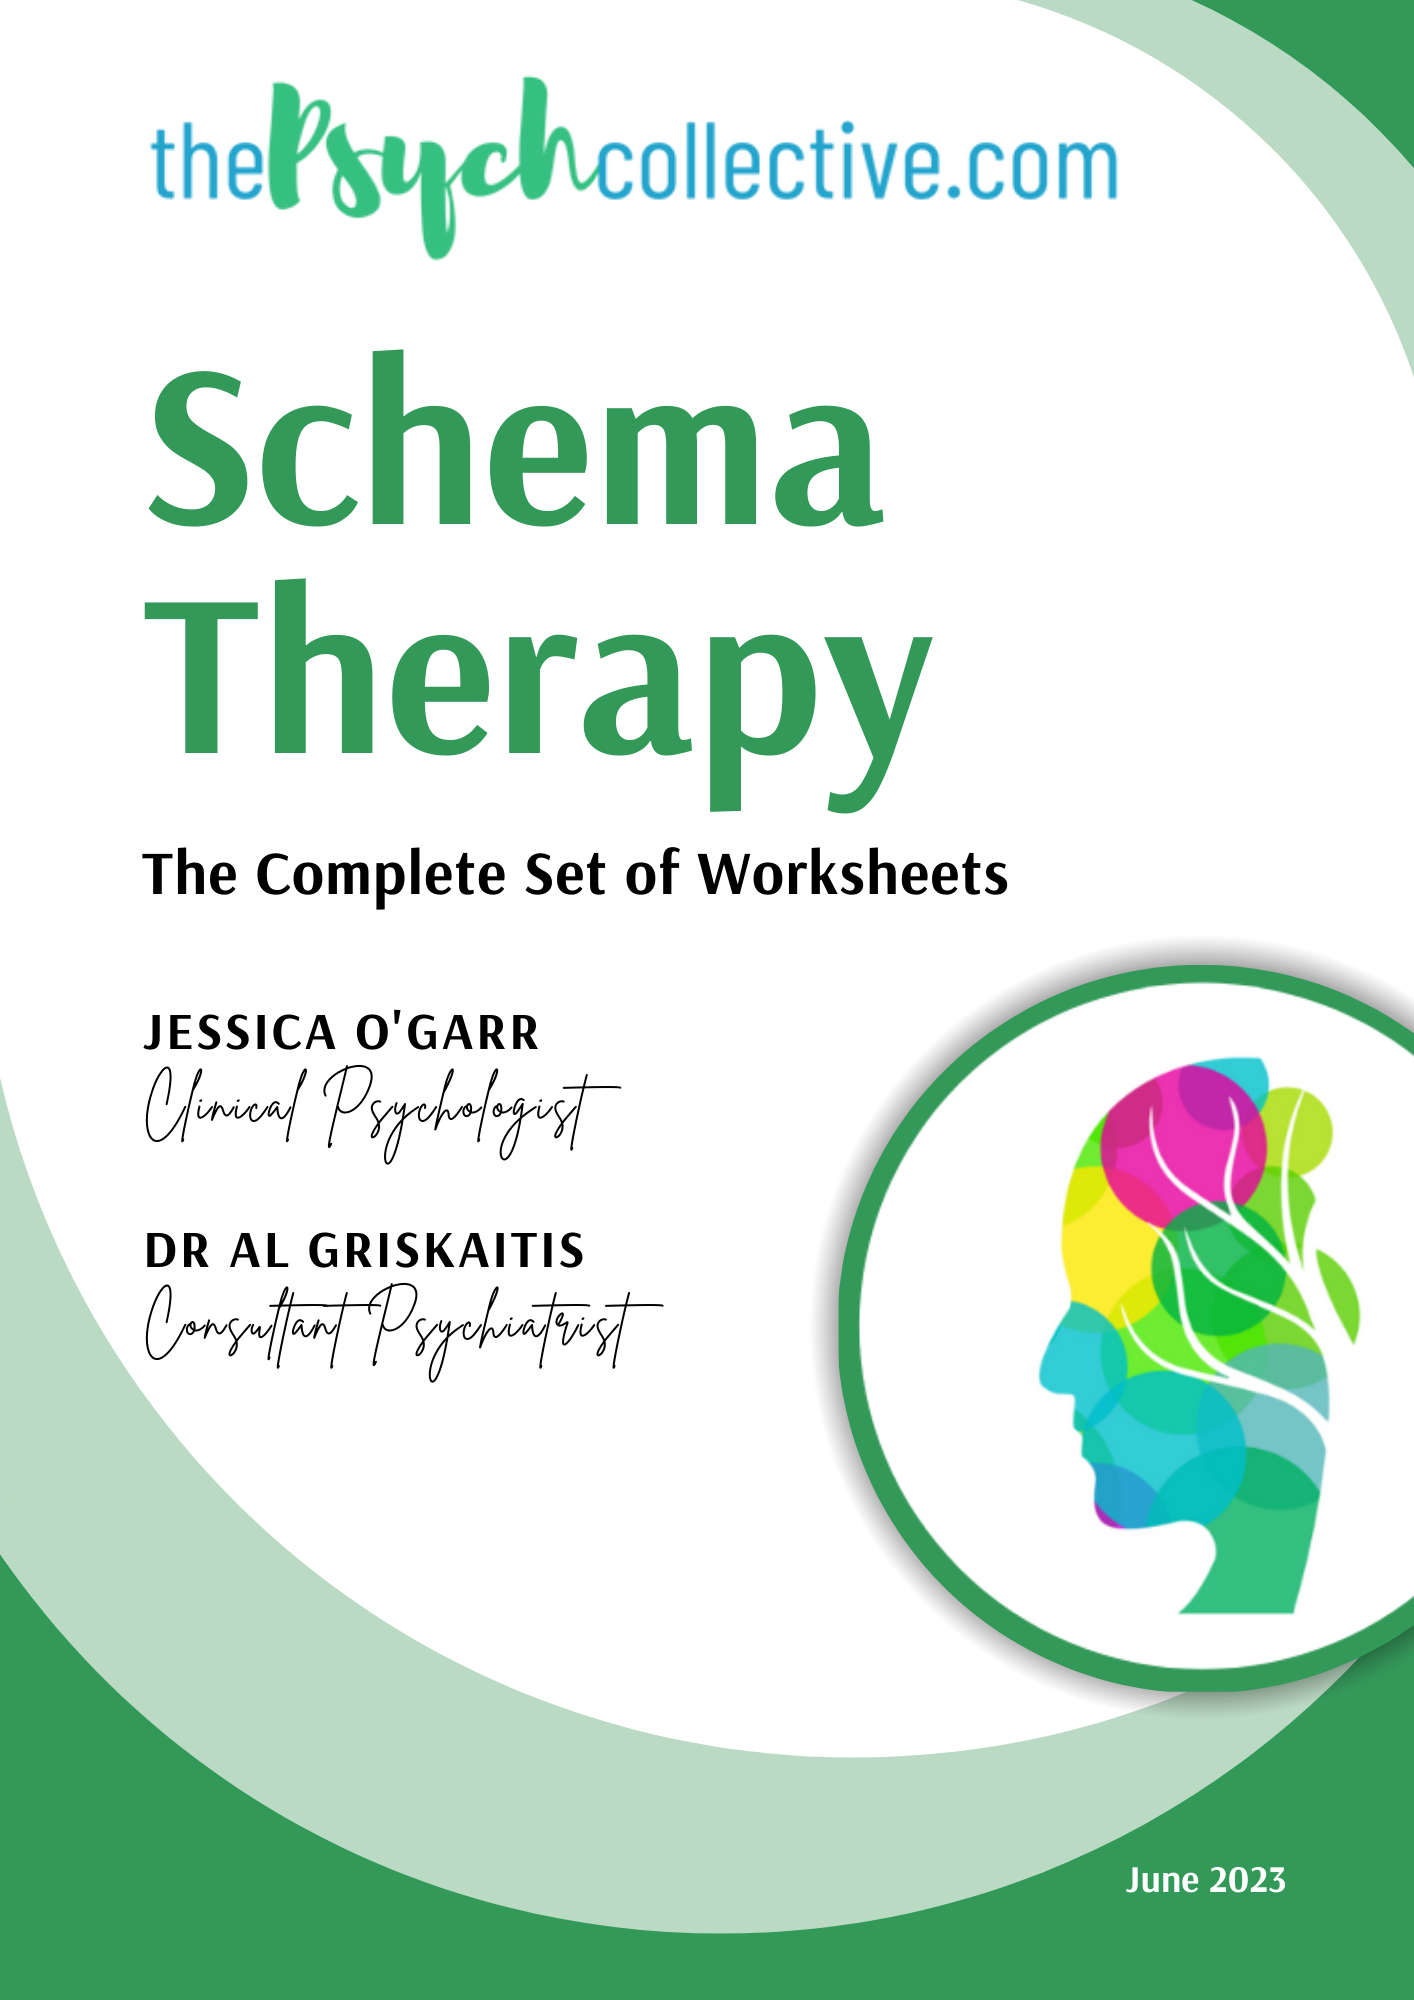 Complete Set of Schema Therapy Worksheets from The Psych Collective